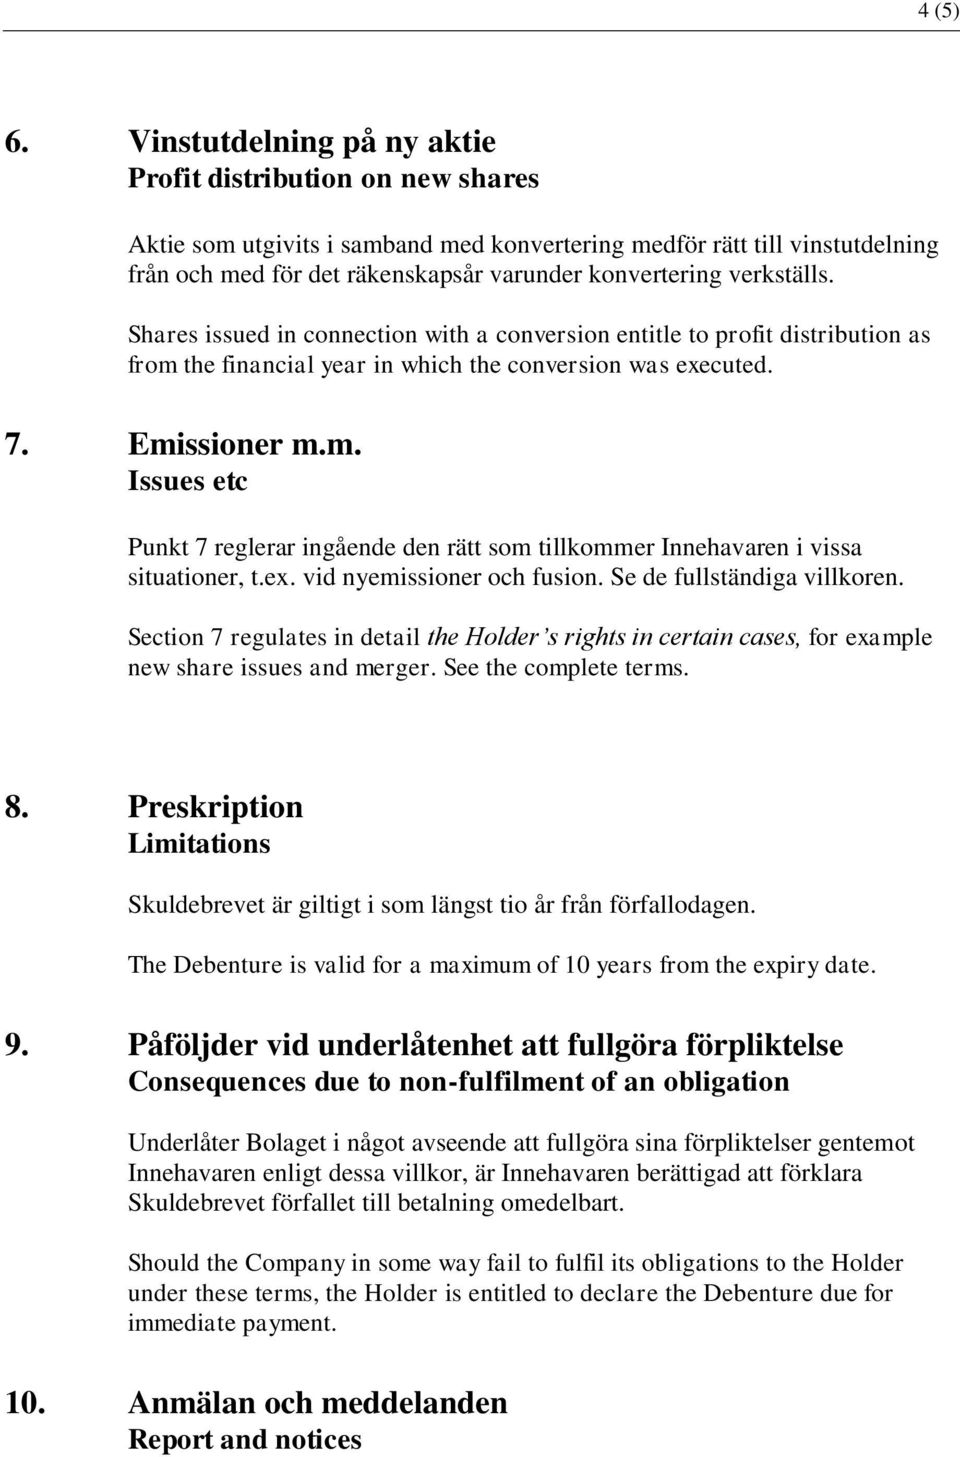 verkställs. Shares issued in connection with a conversion entitle to profit distribution as from the financial year in which the conversion was executed. 7. Emissioner m.m. Issues etc Punkt 7 reglerar ingående den rätt som tillkommer Innehavaren i vissa situationer, t.